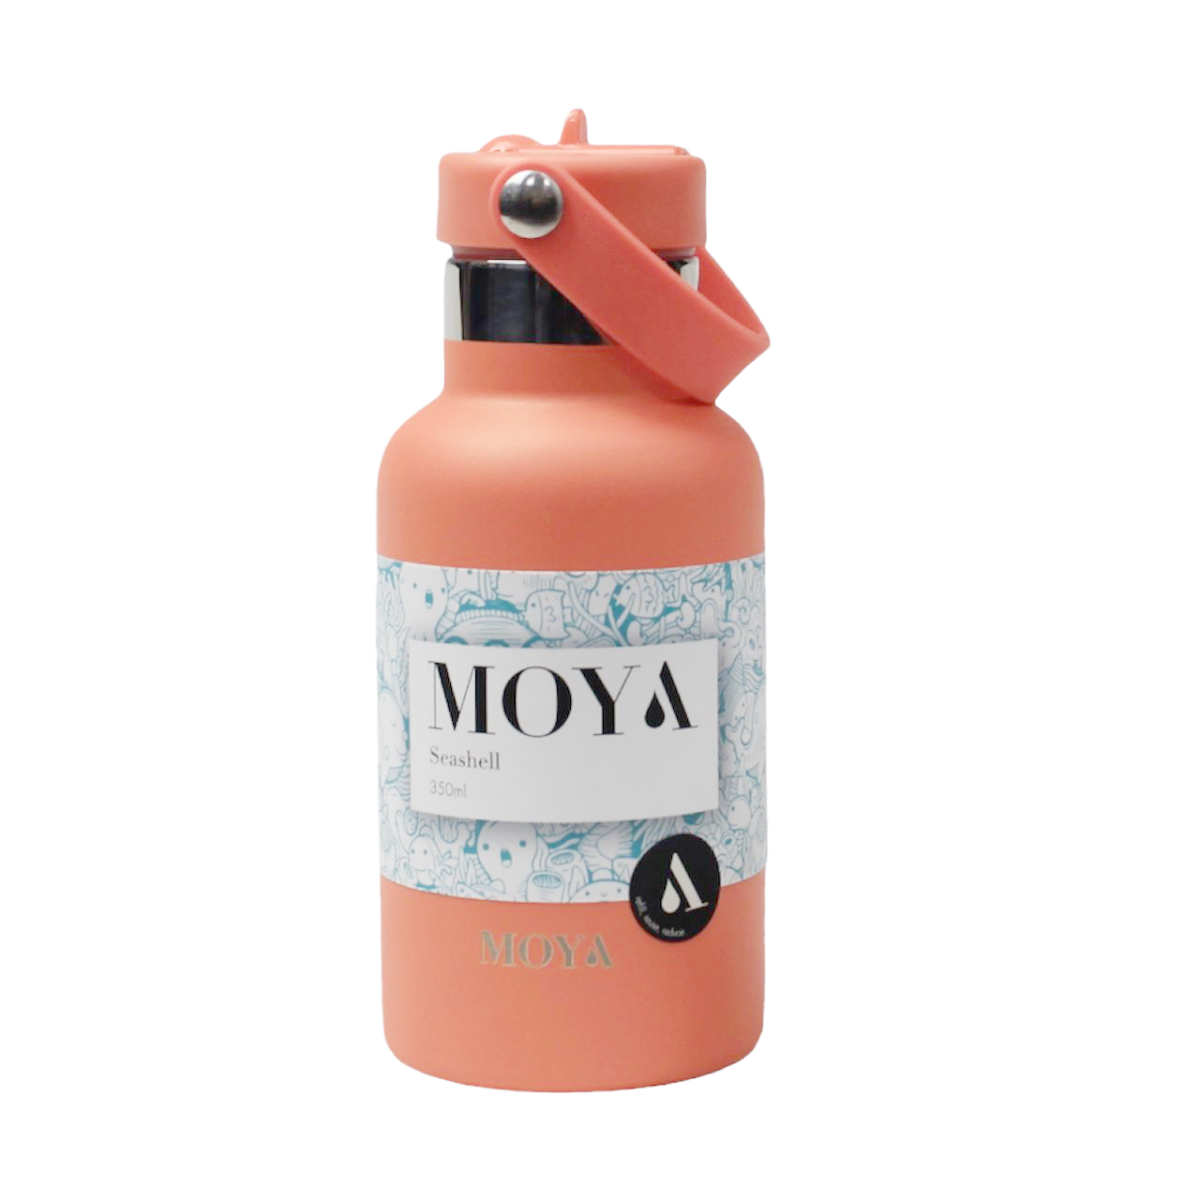 Moya "Seashell" 350ml Insulated Sustainable Water Bottle Coral